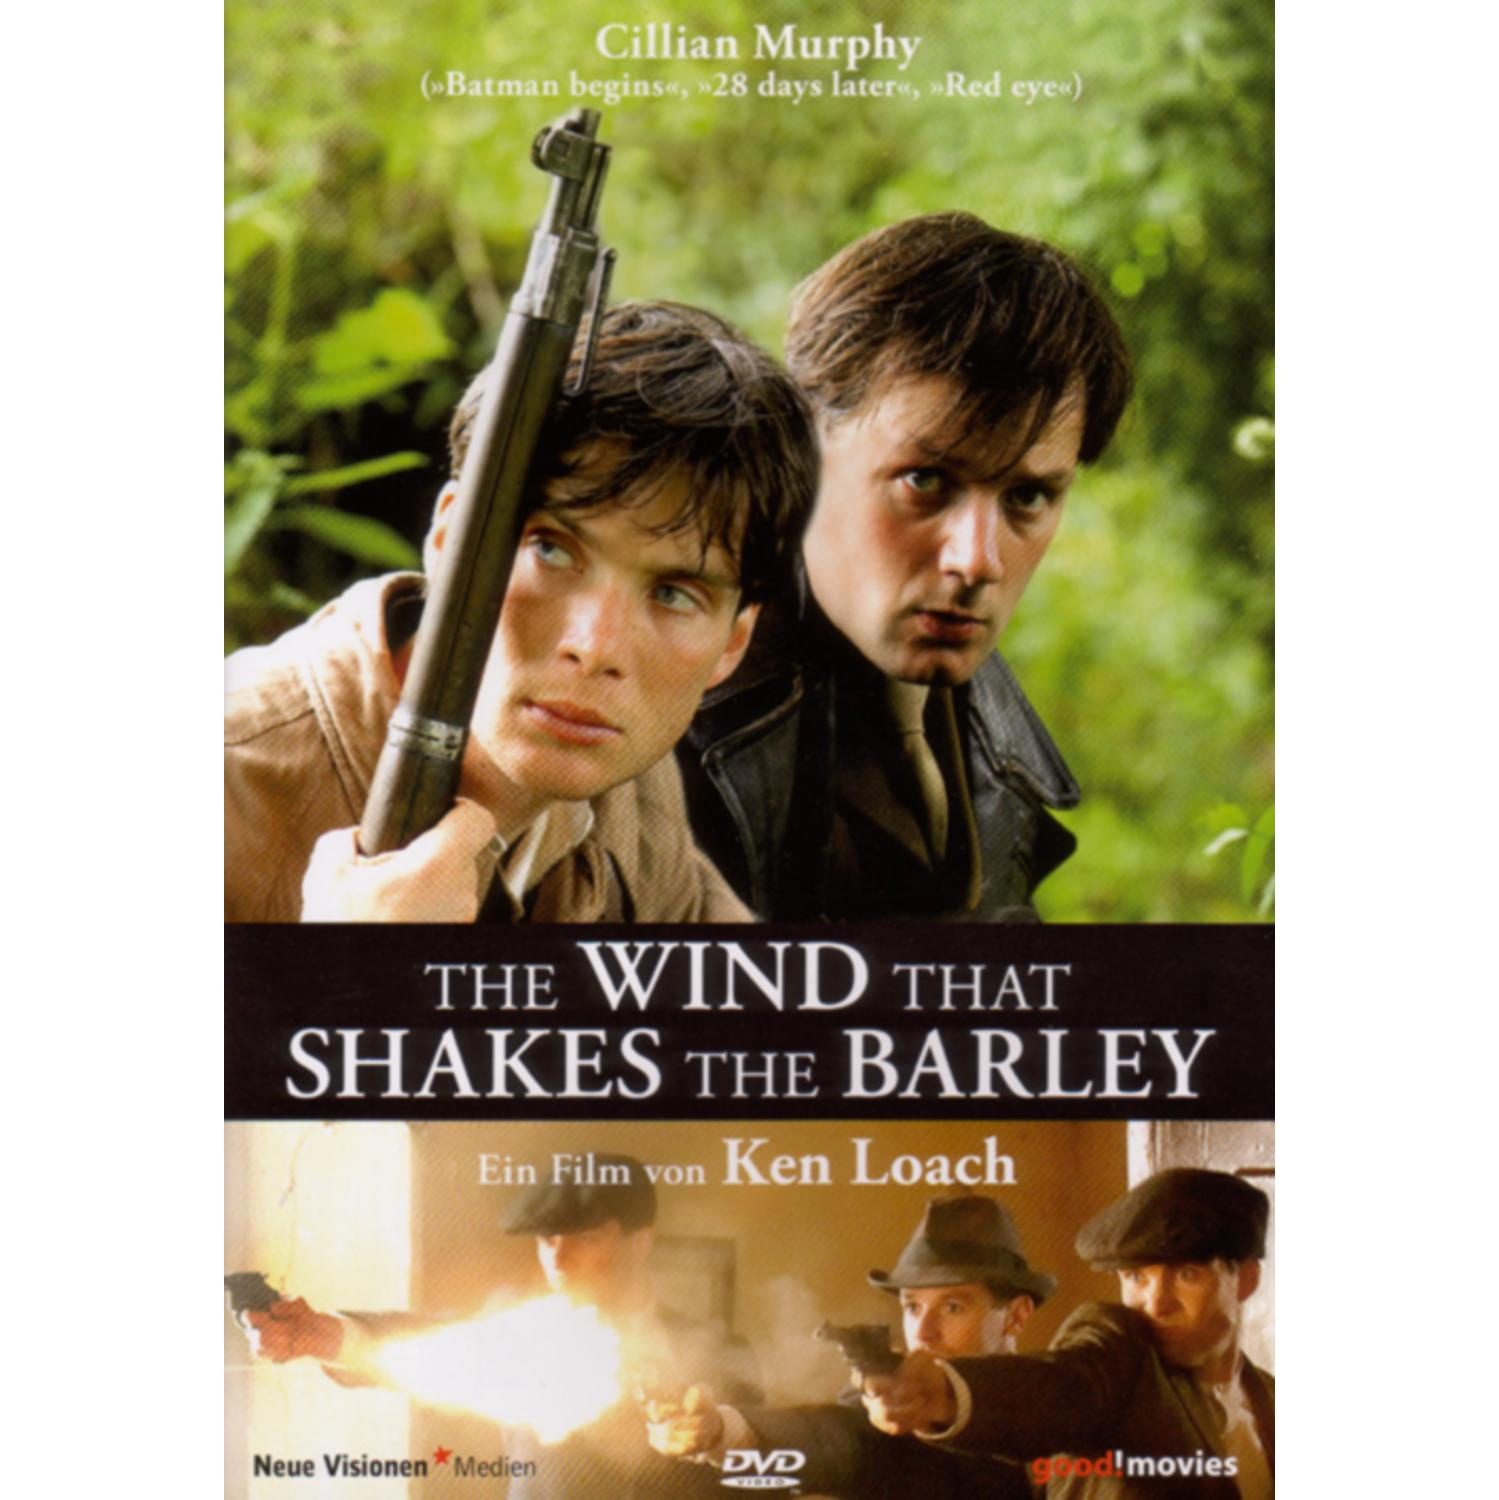 The Wind that Shakes the Barley DVD